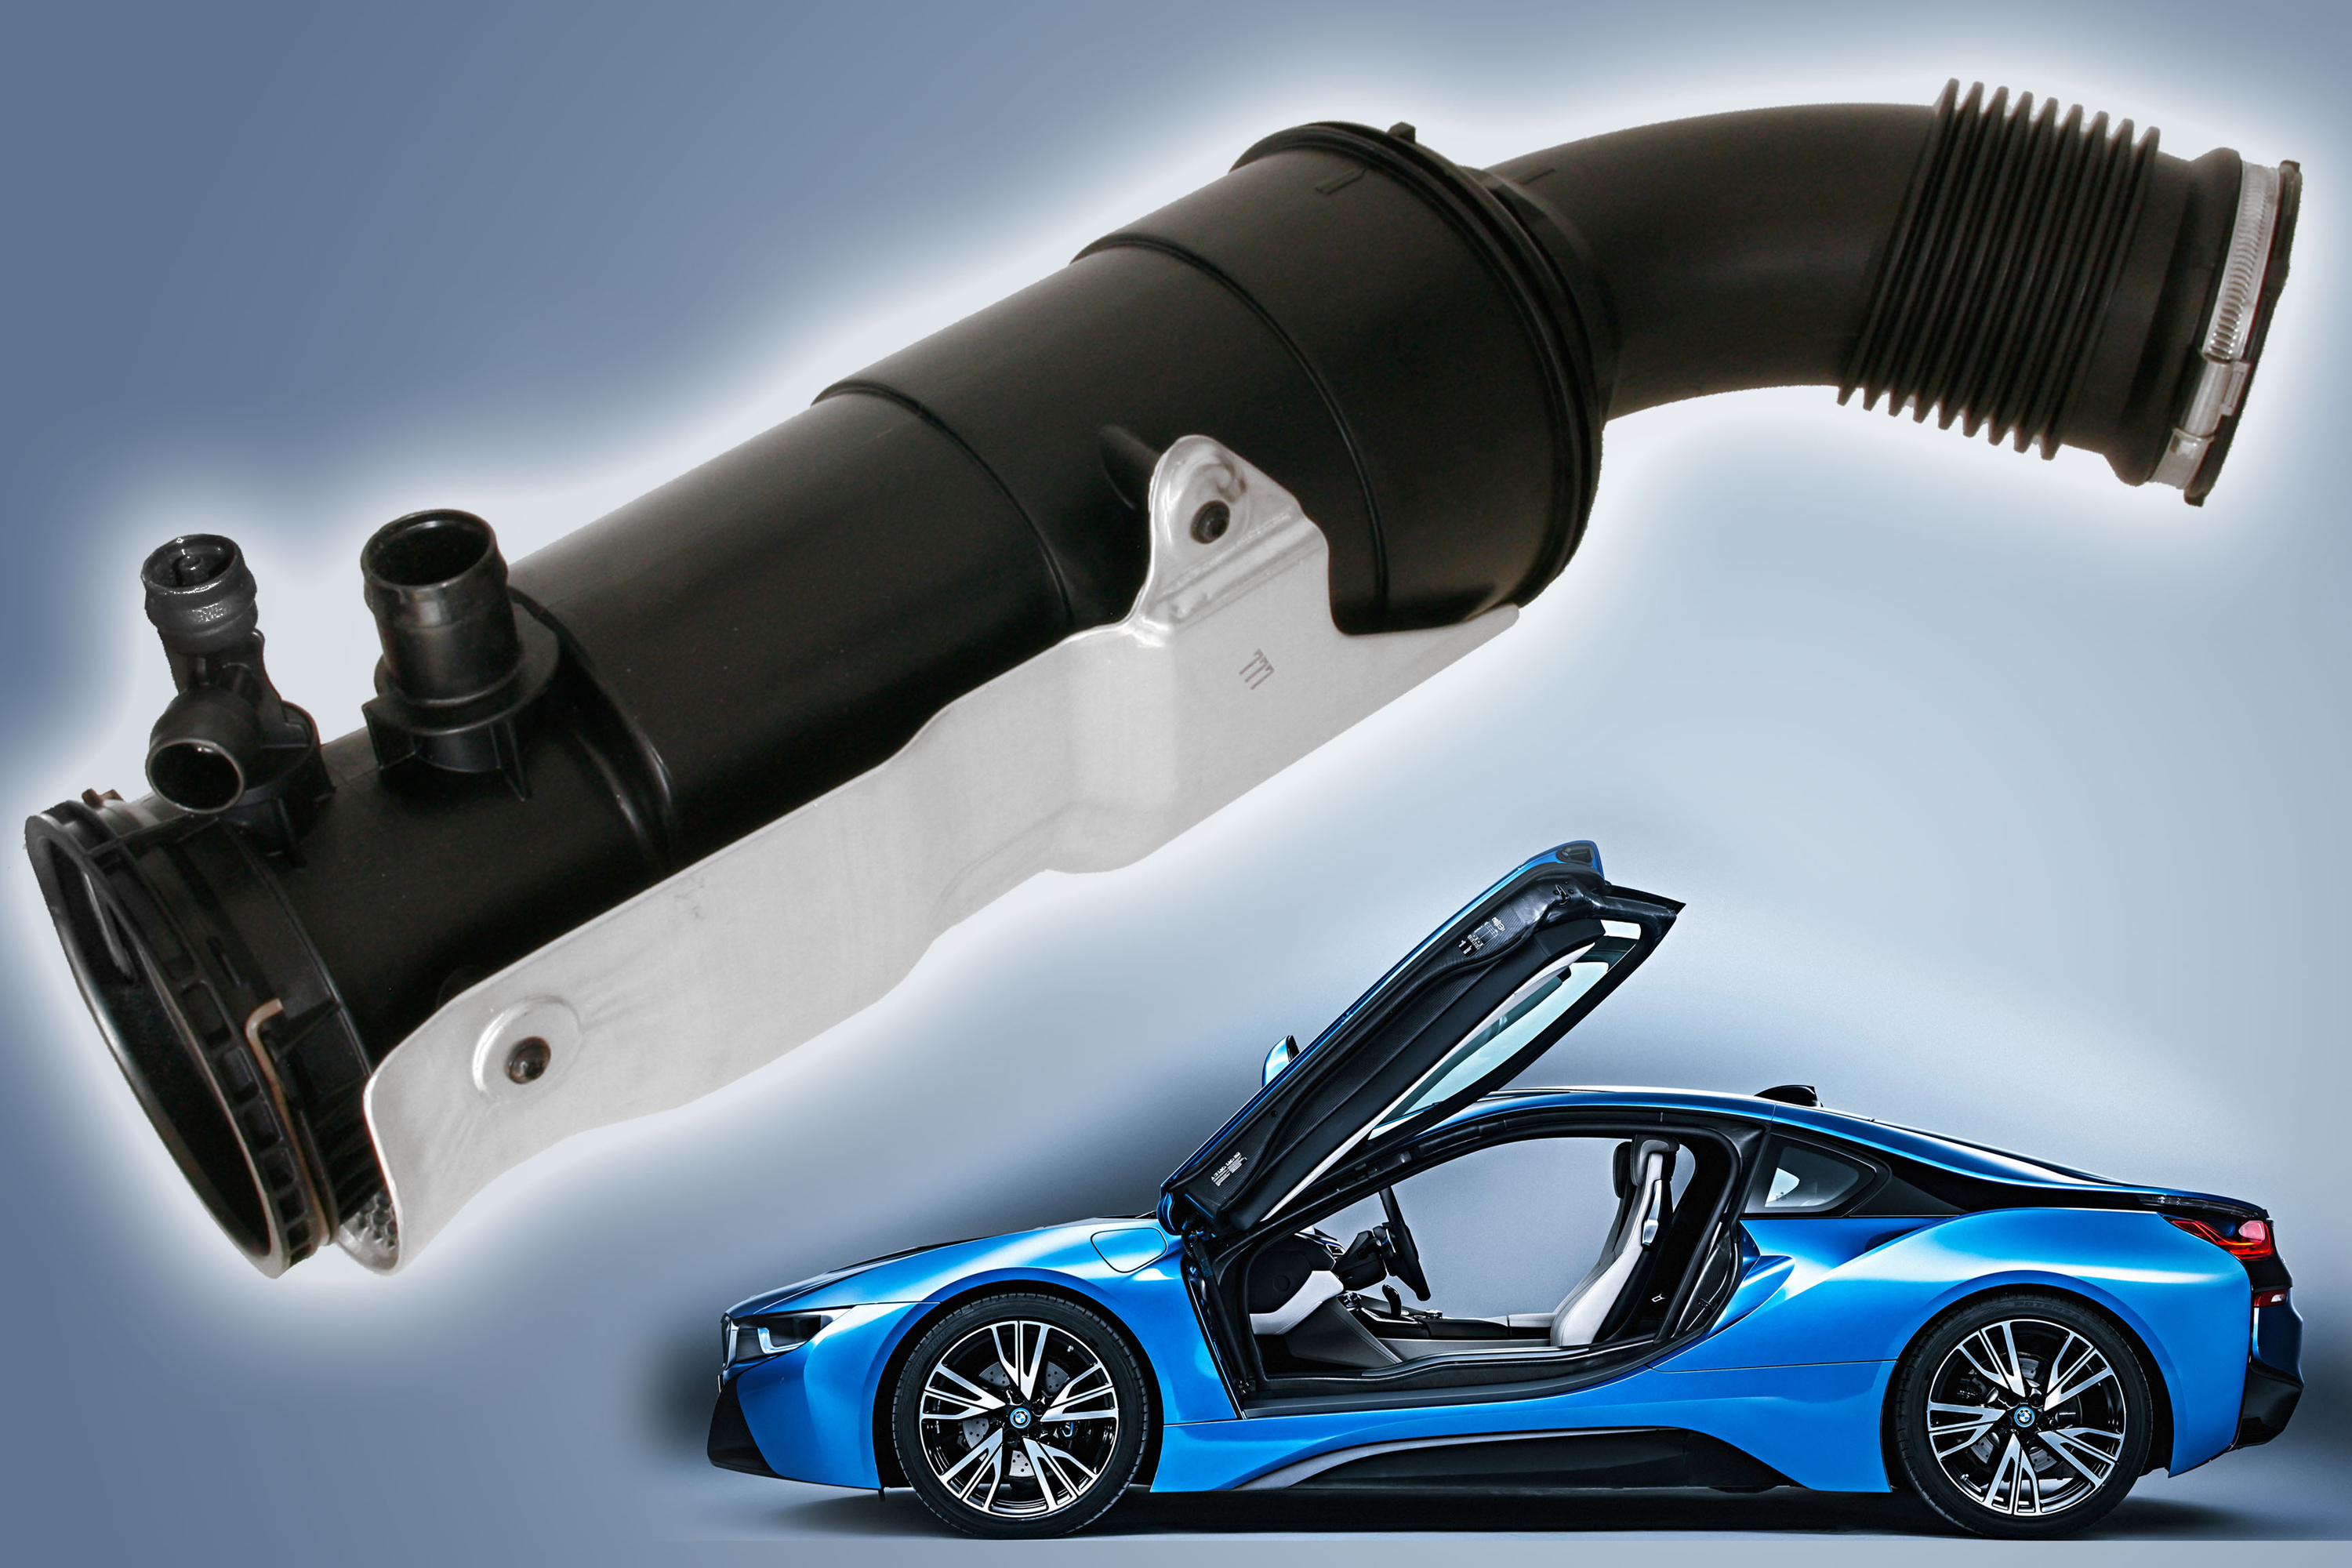 The resonator is part of the air management system of the car’s compact 1.5 litre three cylinder petrol engine.